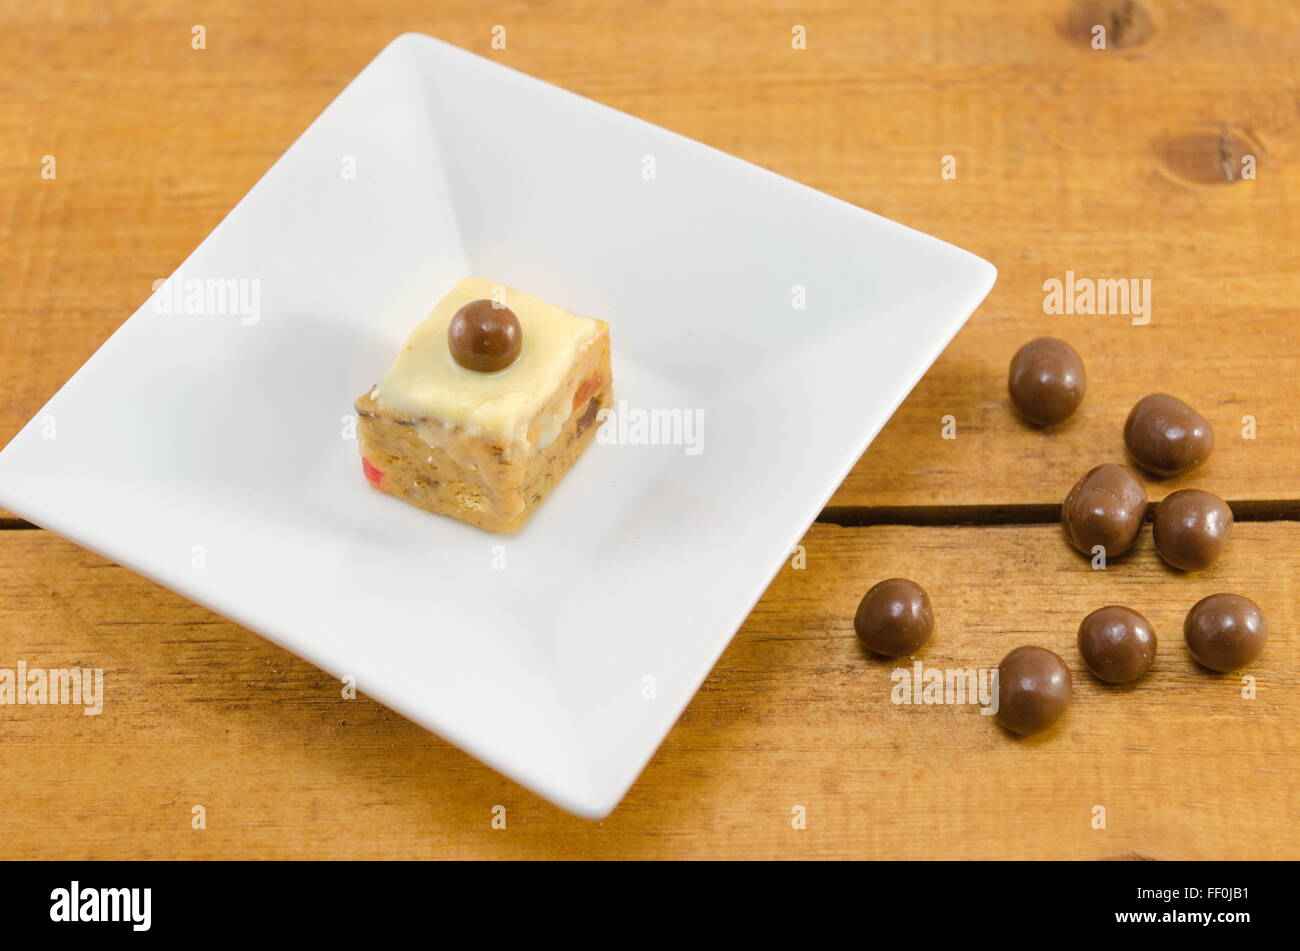 dessert with chocolate ball on top in a white plate Stock Photo